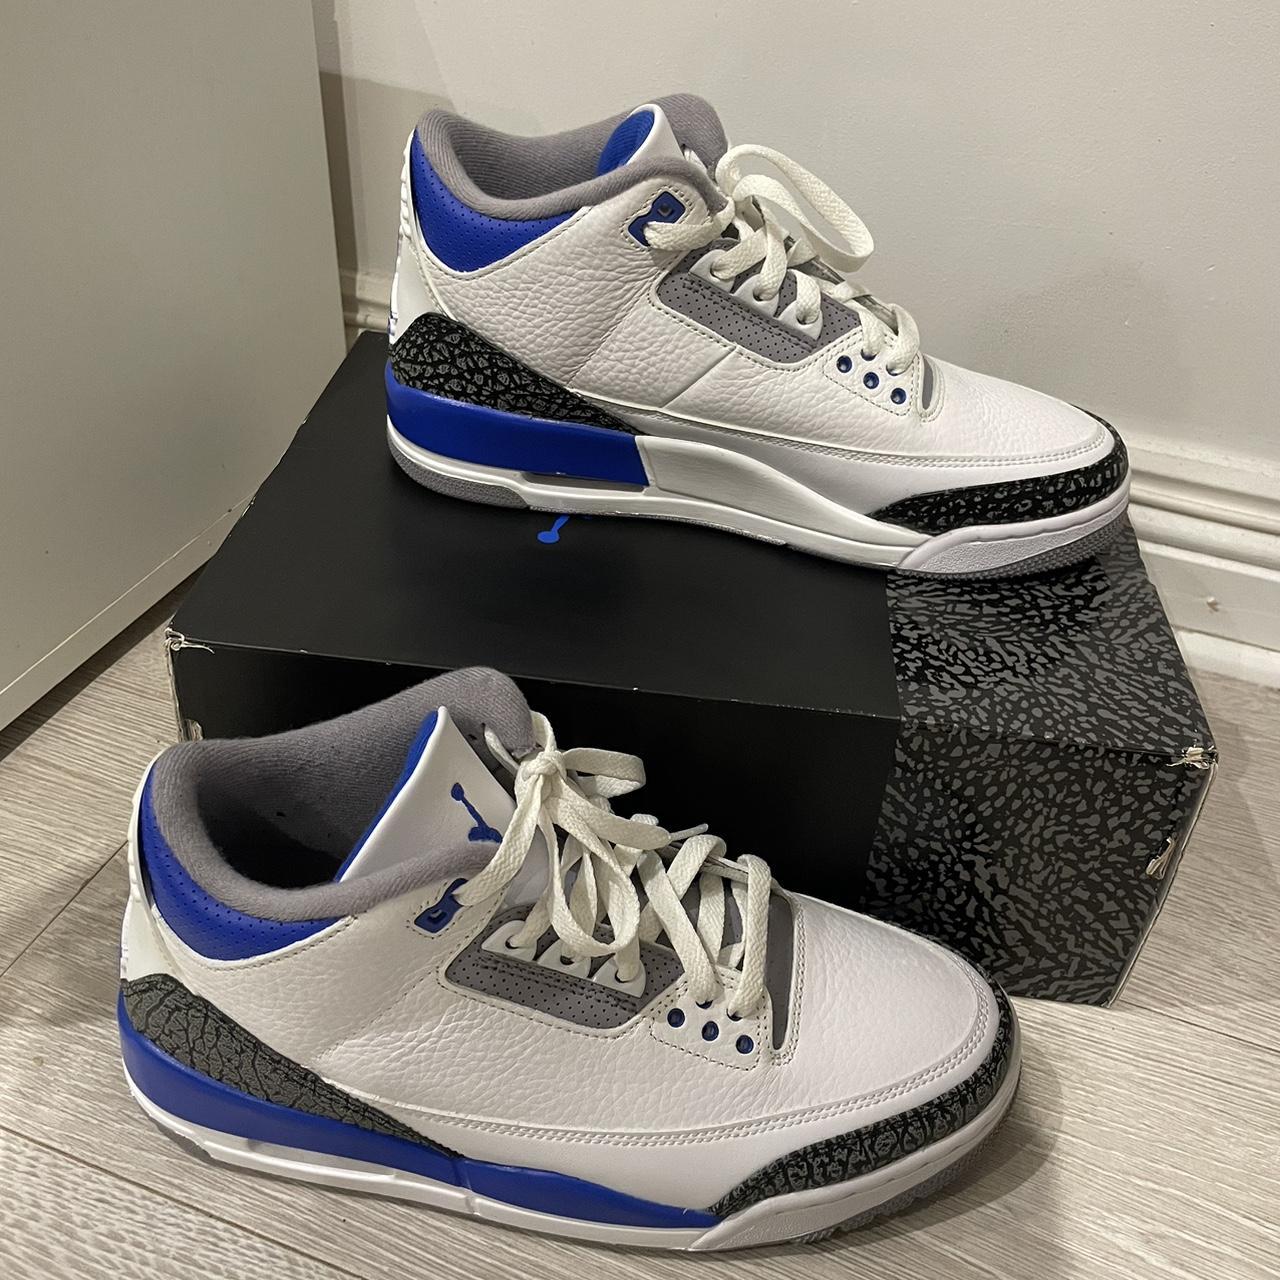 BRAND NEW! NIKE AIR JORDAN 3 SIZE 8 WITH BOX AND... - Depop